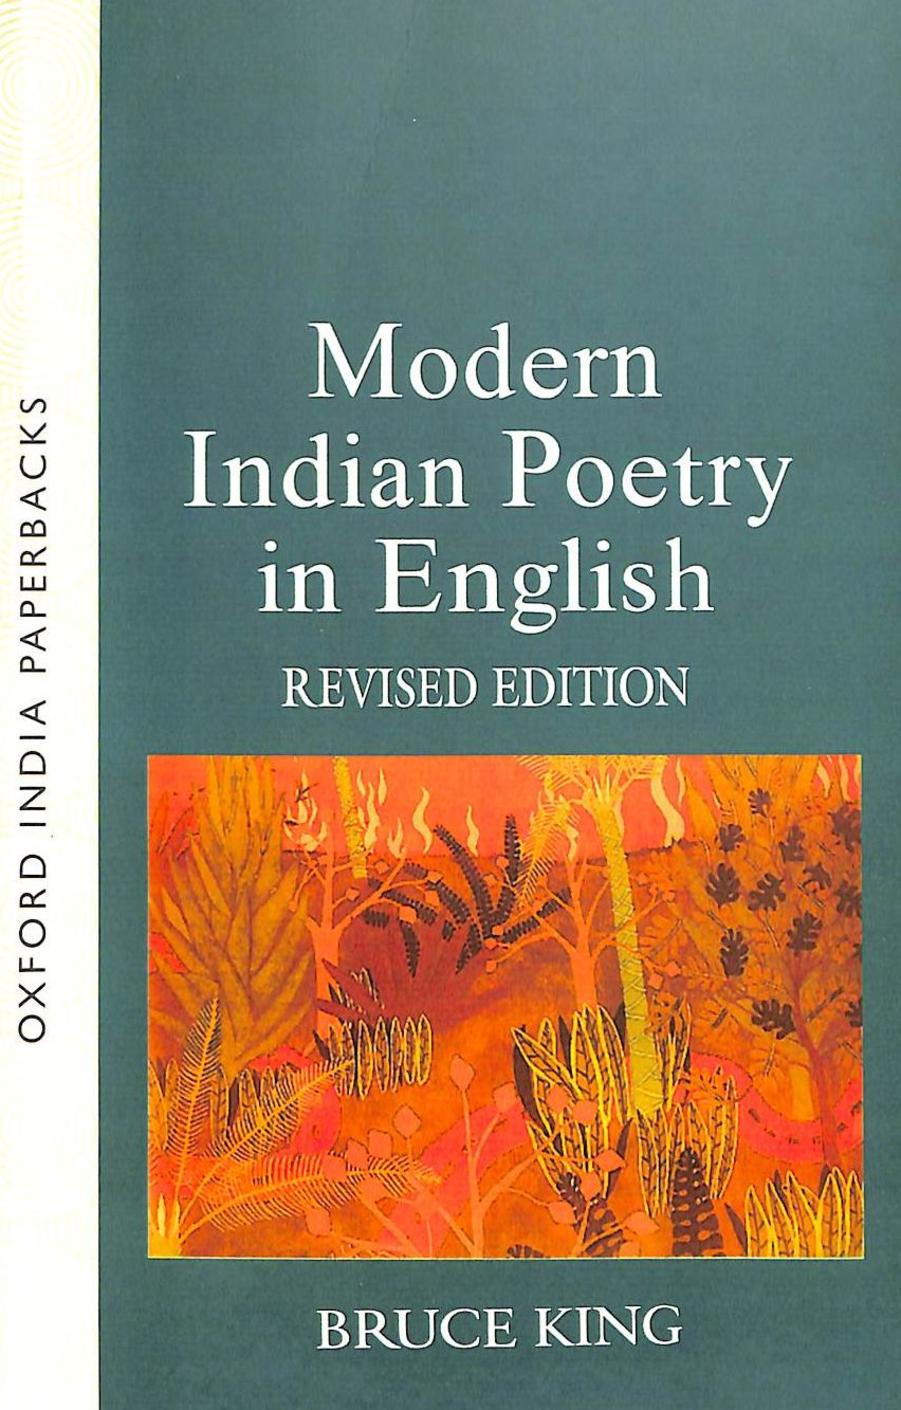 Buy Modern Indian Poetry In English book : Bruce King , 019567197X ...